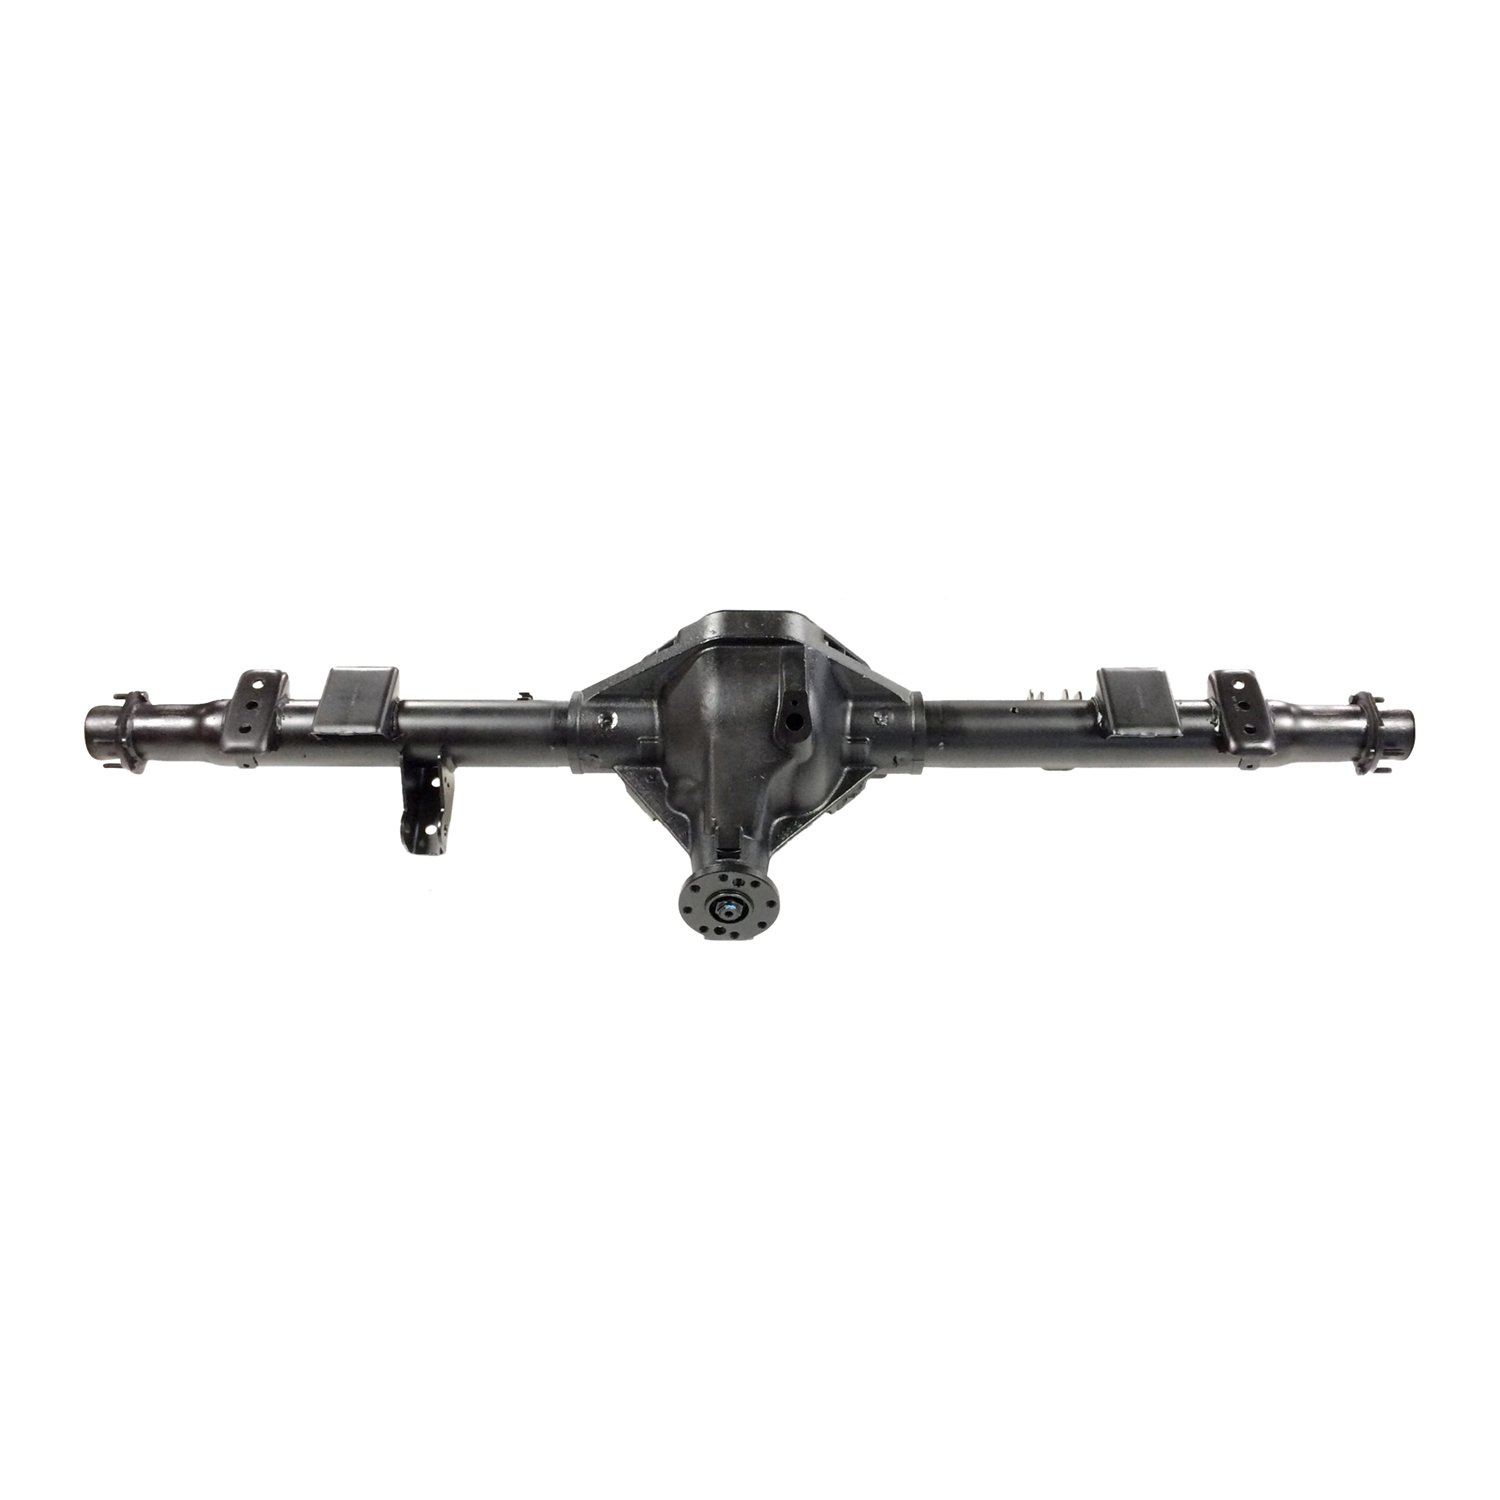 Remanufactured Complete Axle Assembly for Chy 9.25" 02-05 D1500 3.55 , 4x4, Posi LSD